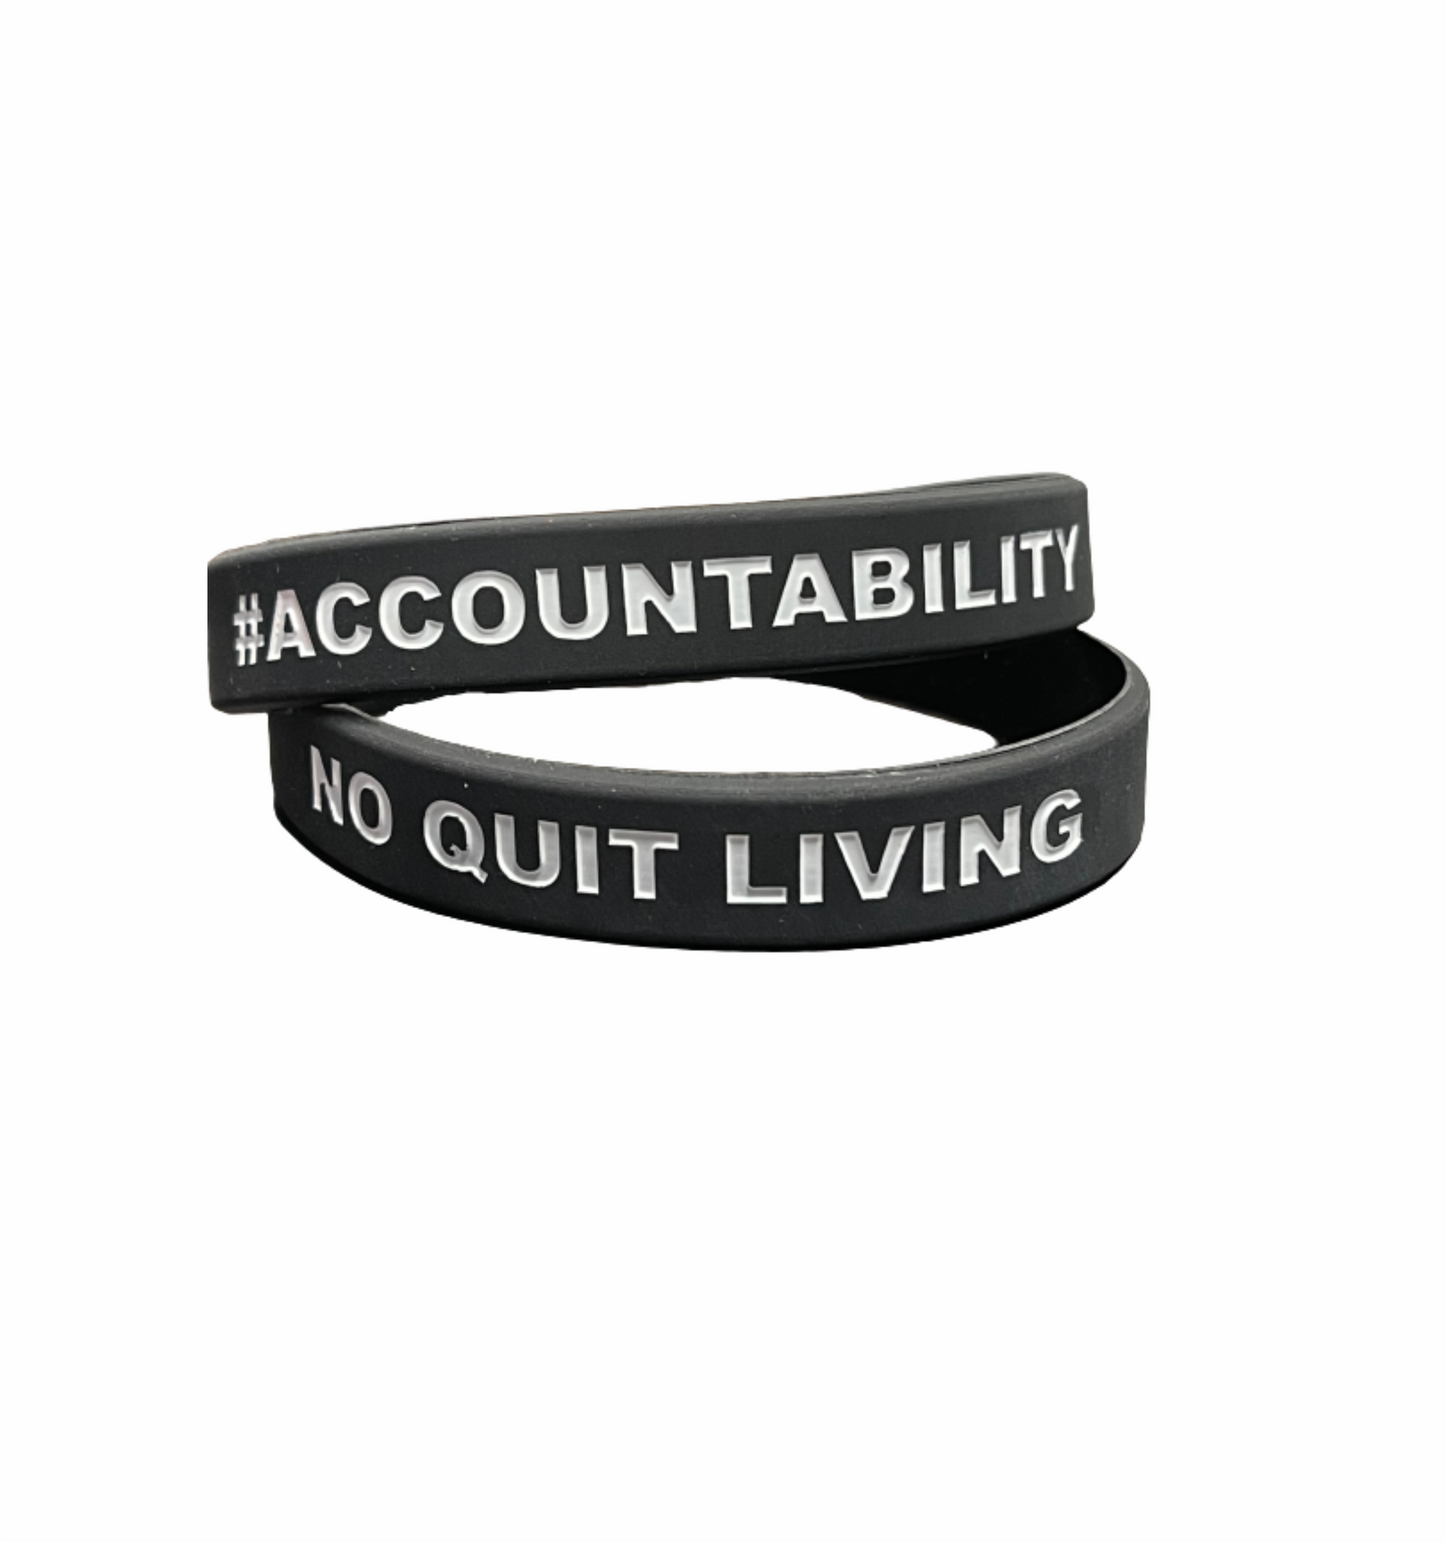 No Quit Living Silicone Wristband - Pack of 50